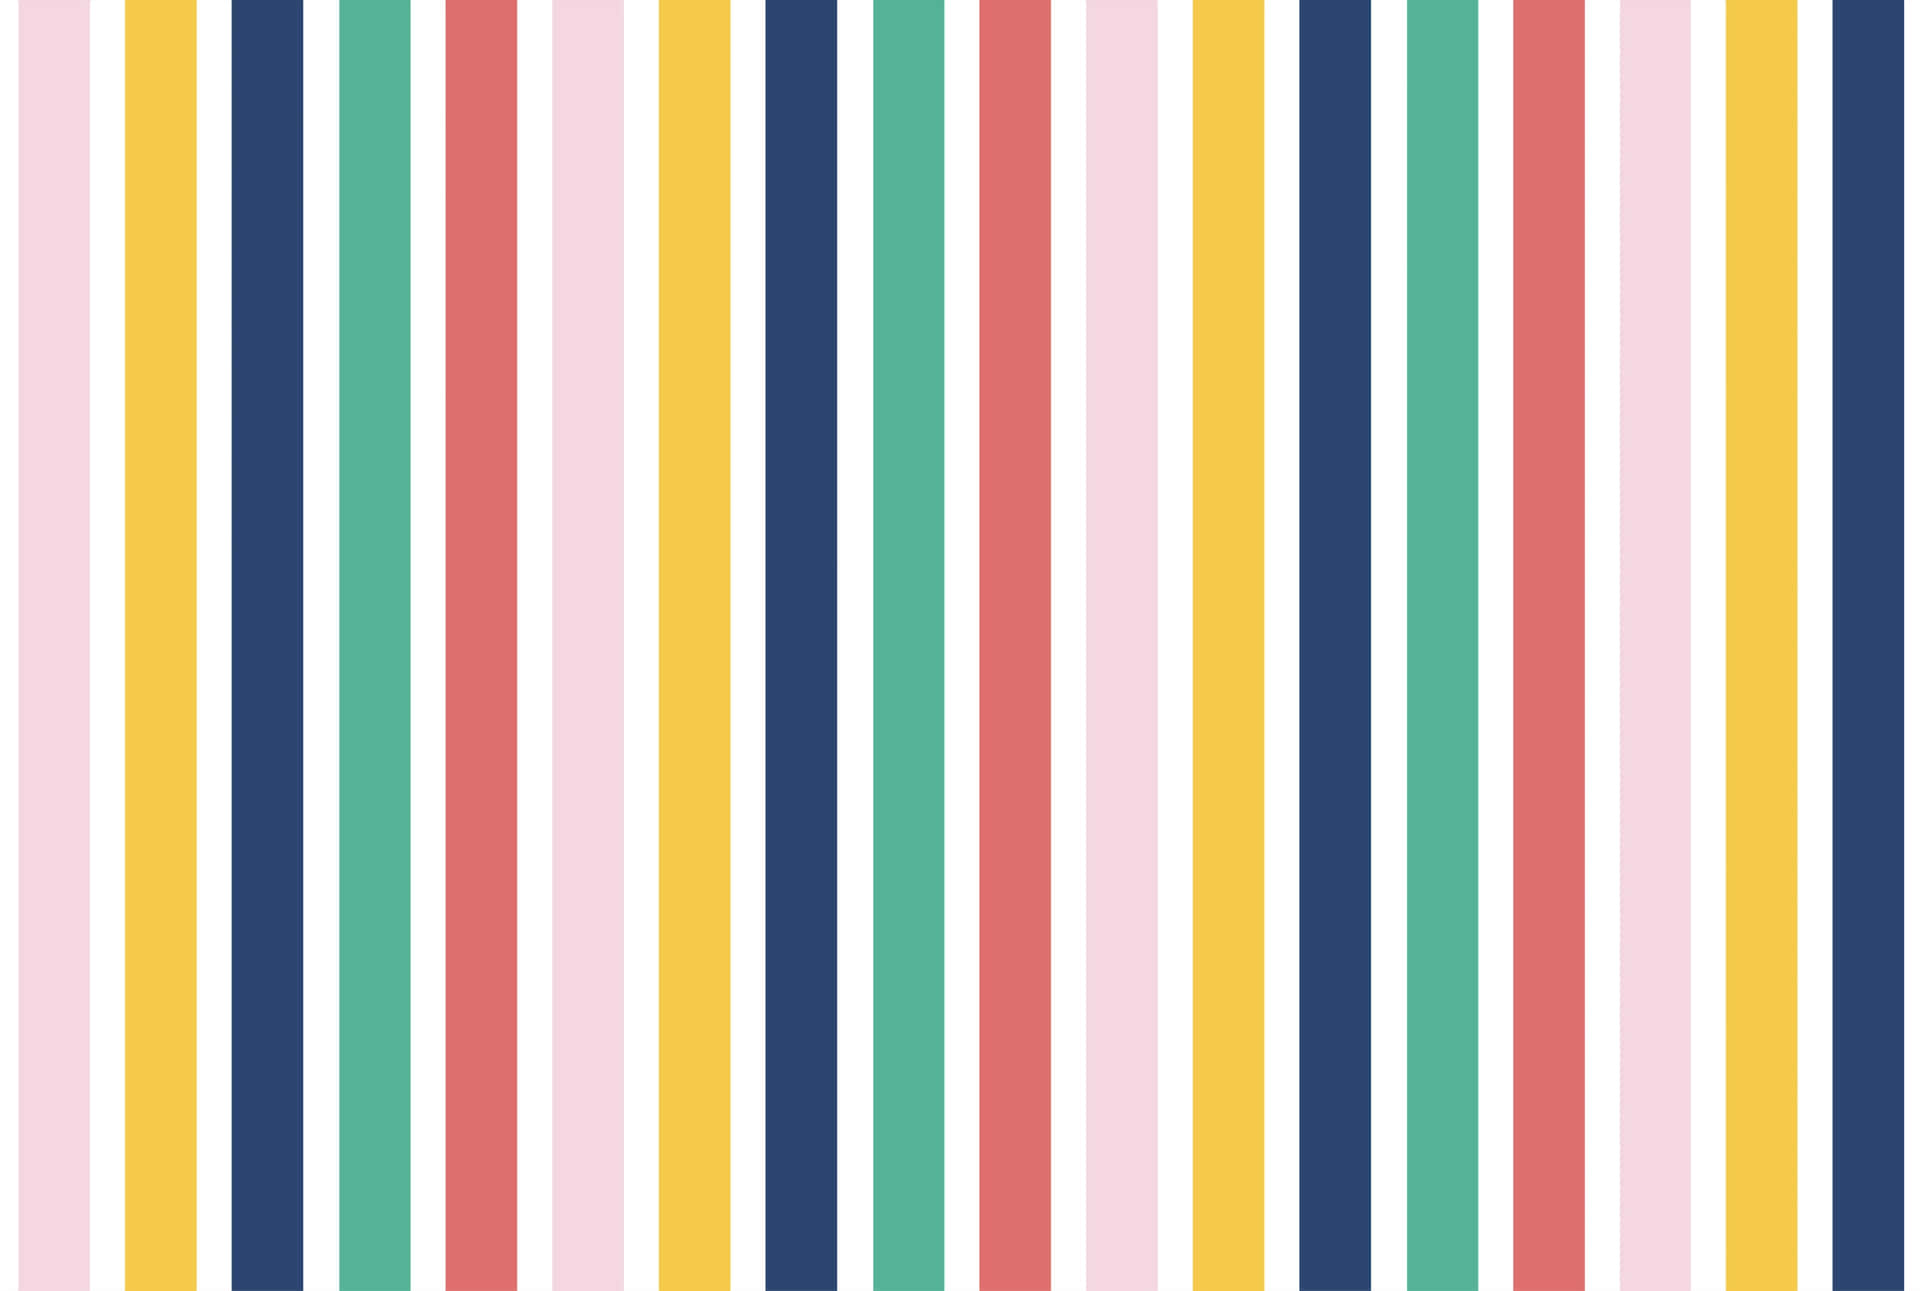 Colorful stripes against a black background